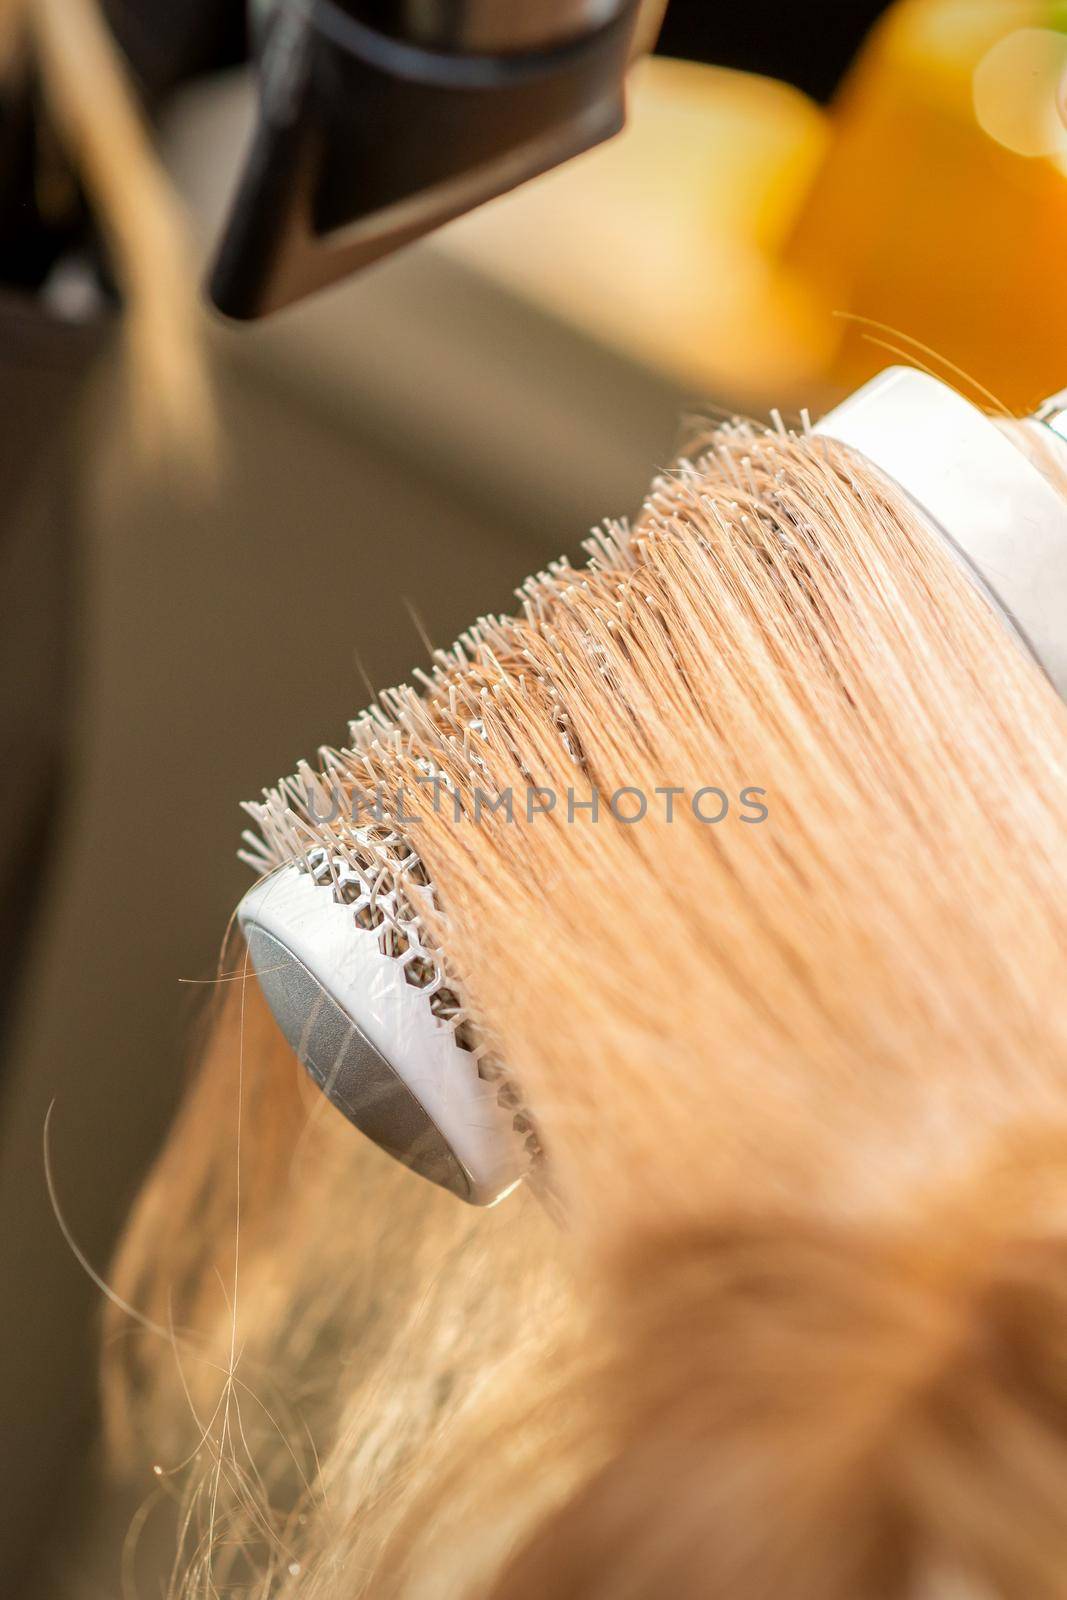 Hairdresser hand drying blond hair with a hairdryer and round brush in a beauty salon. by okskukuruza